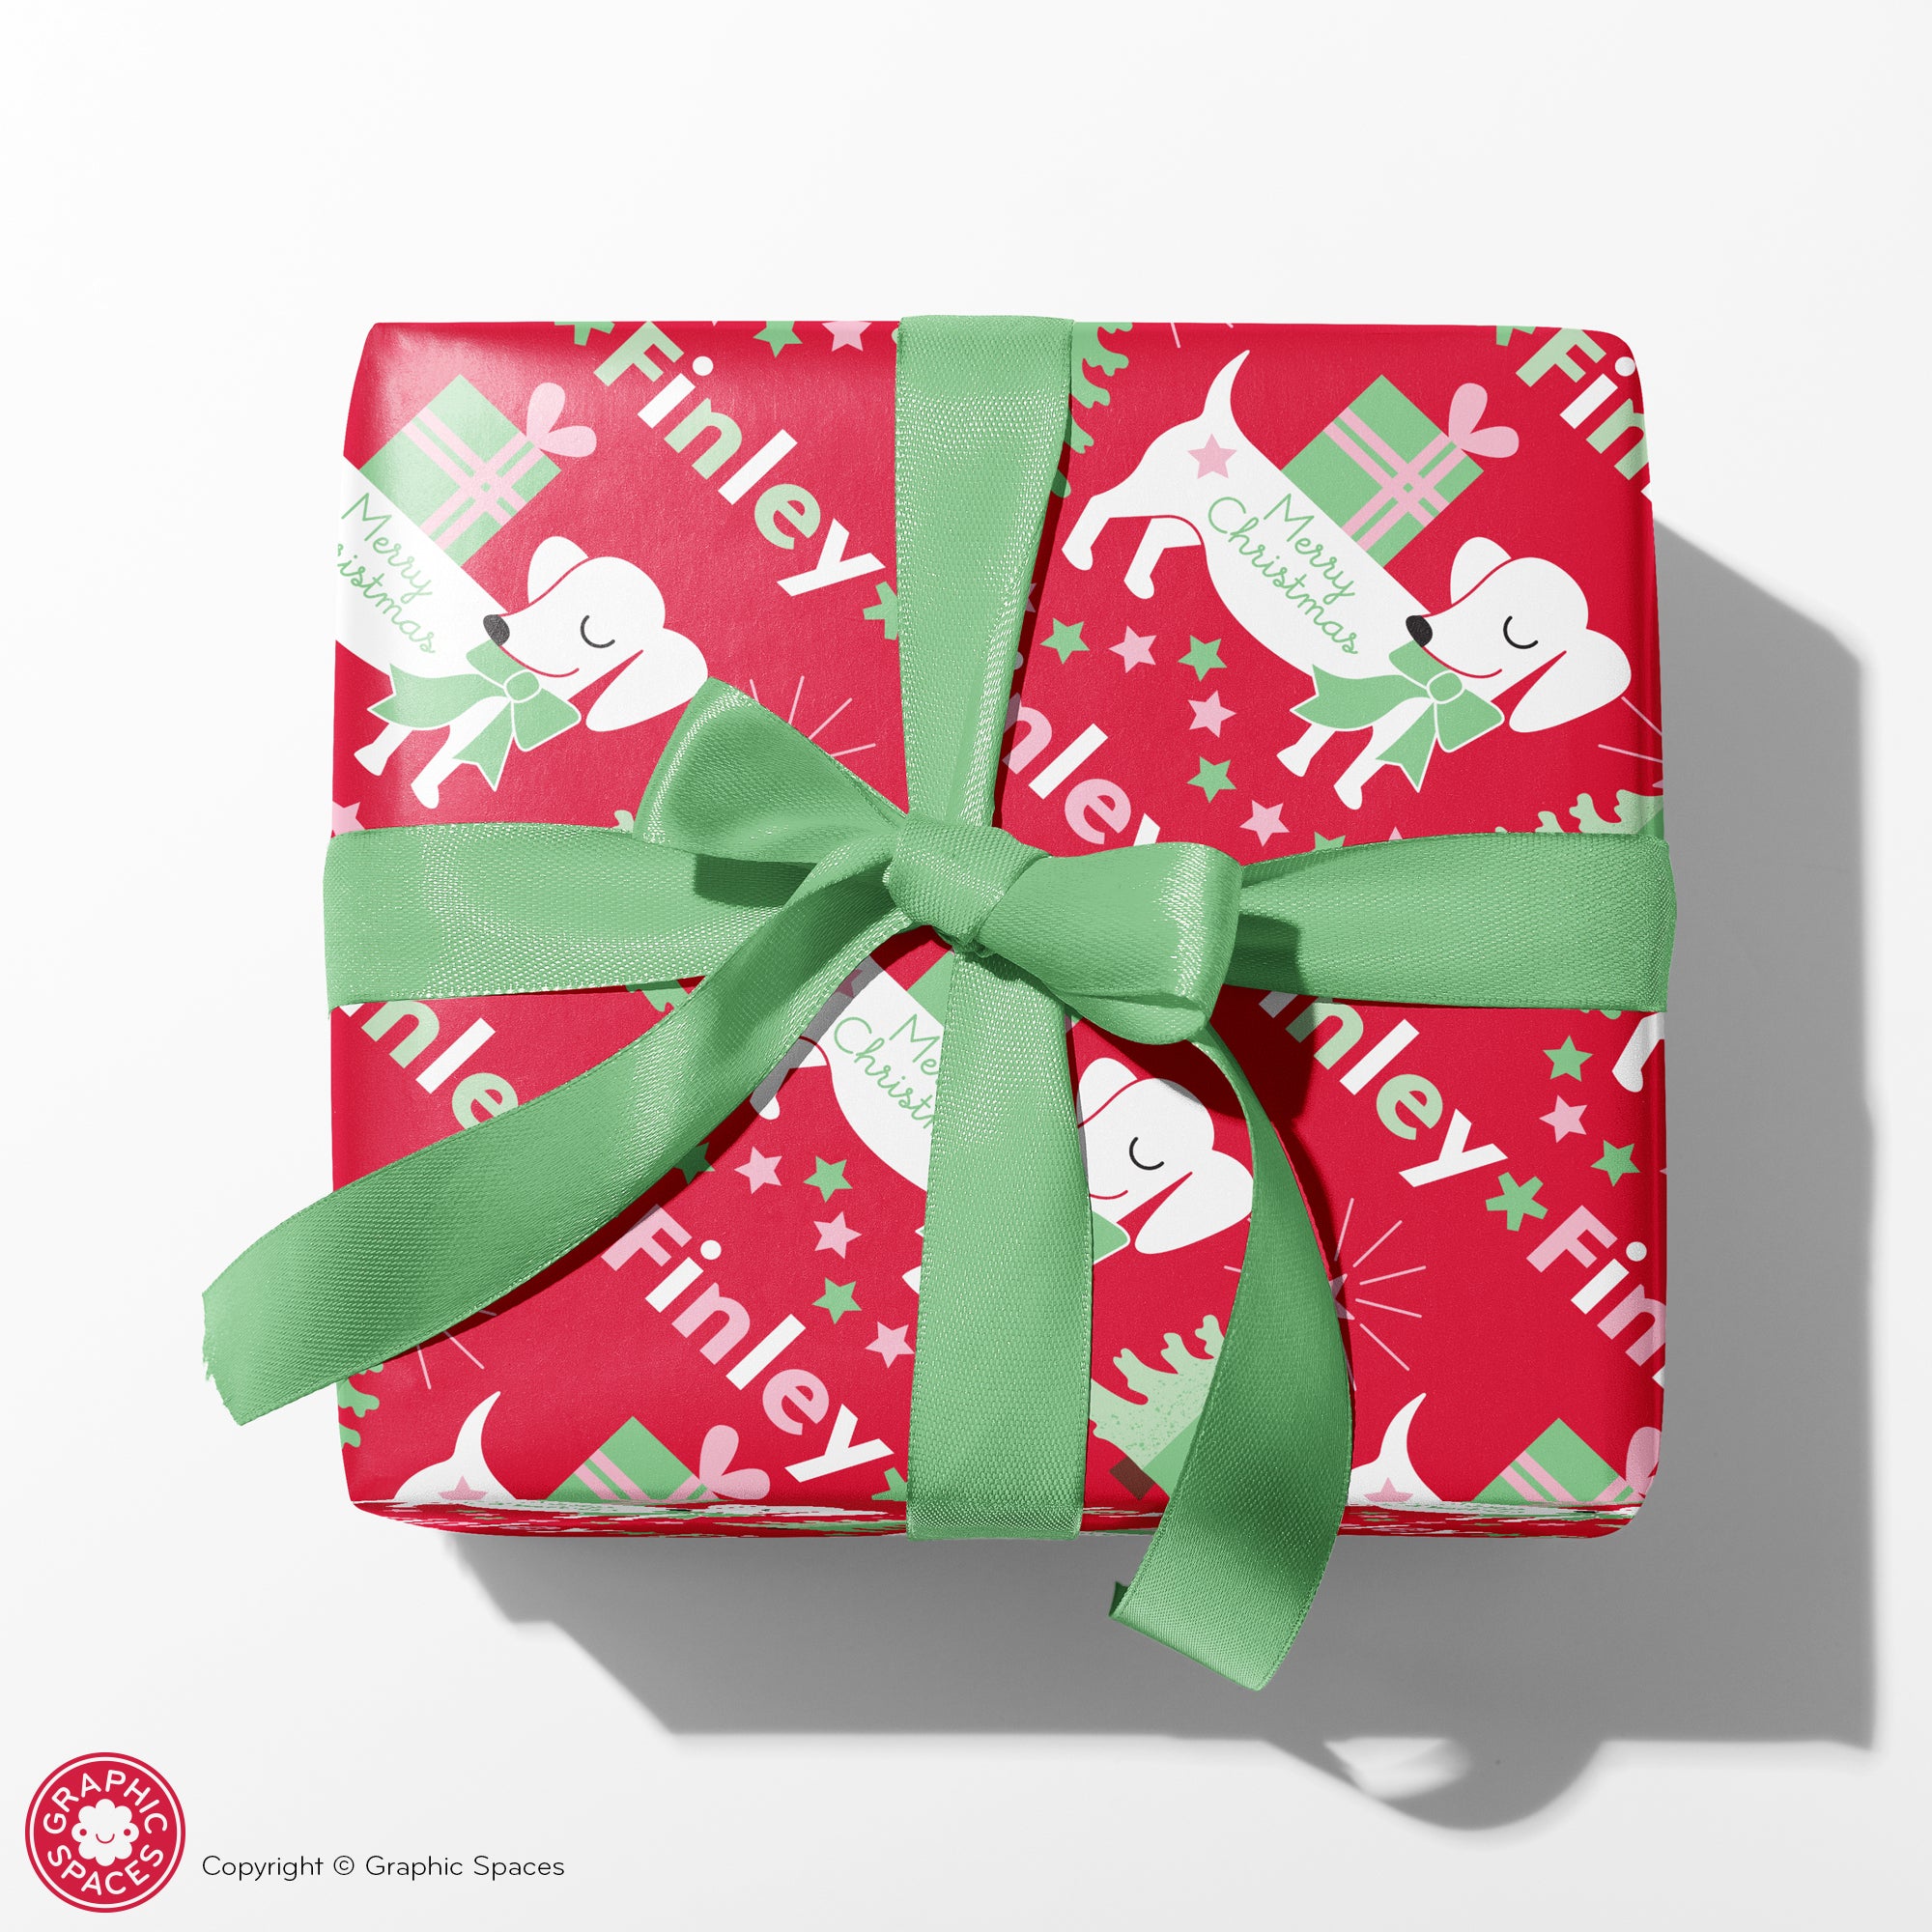 Sausage Dog Christmas Wrapping Paper Kit, Dachshund Wrapping Paper